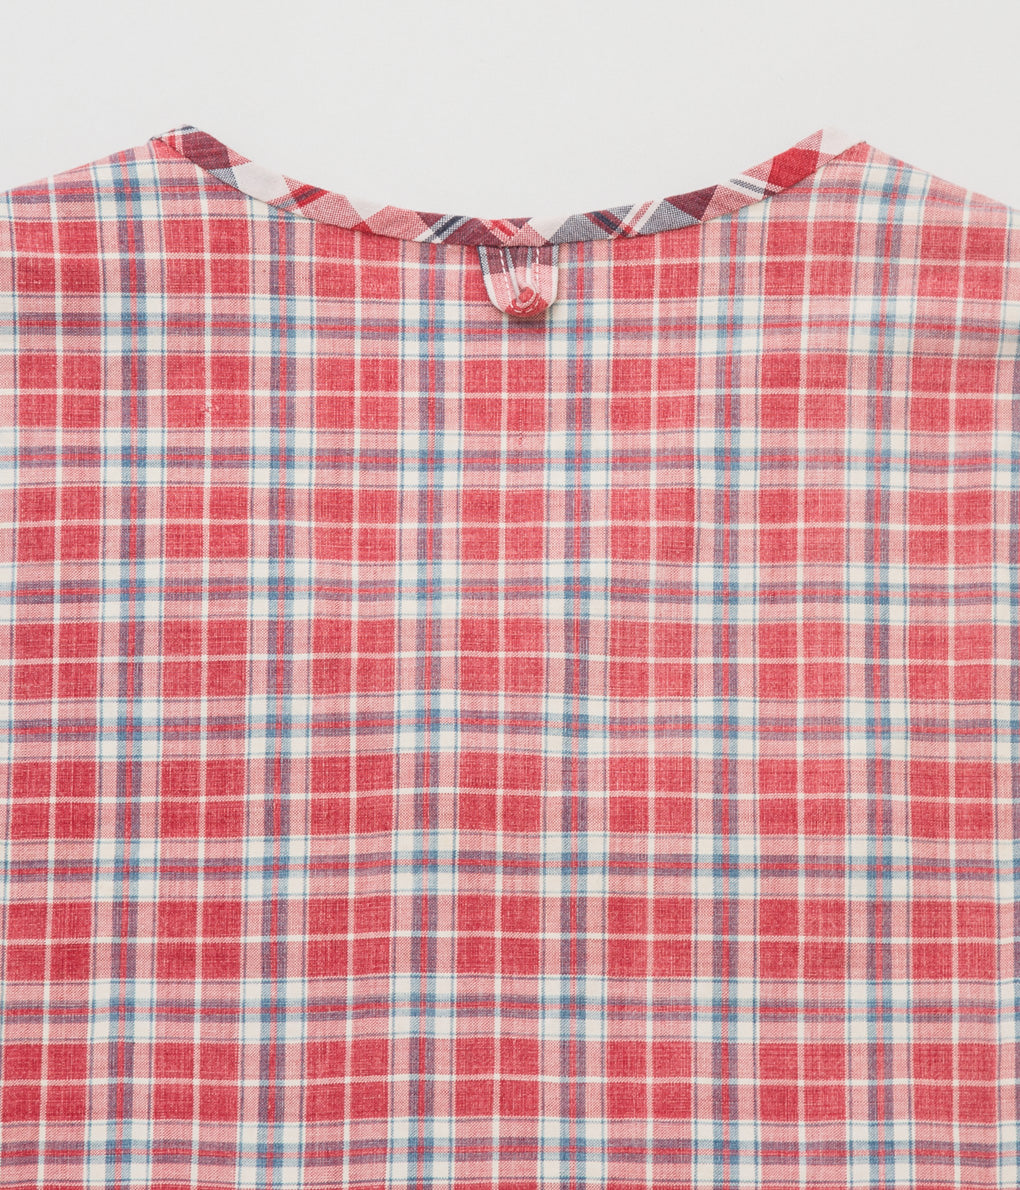 OLIVER CHURCH "SOFT SHIRT (ANTIQUE/VINTAGE FRENCH COTTON/LINEN)"(RED CHECKS/PLAID PATCH WORK)